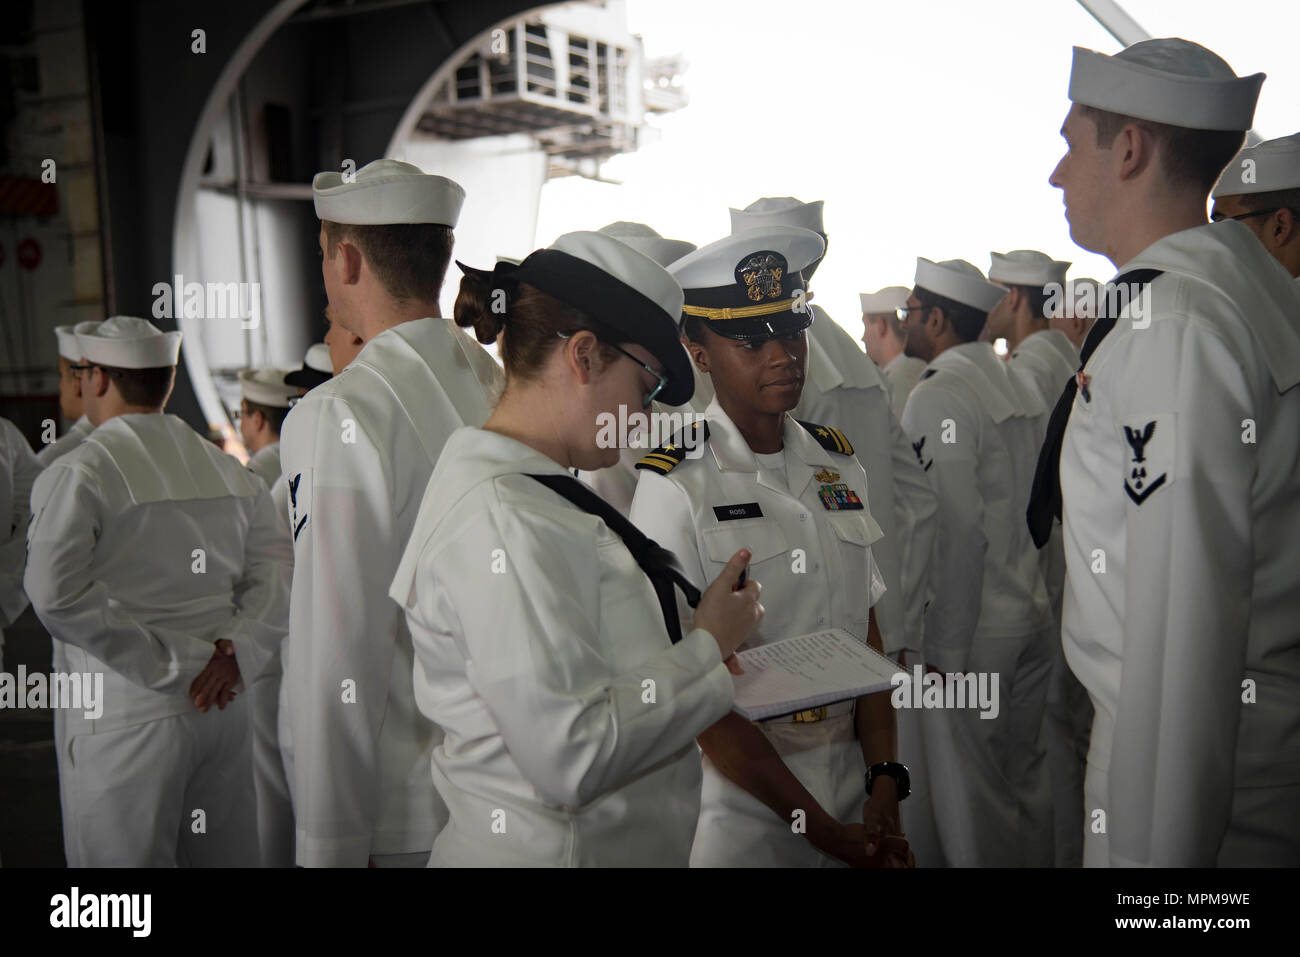 170328-N-LA456-008    NORFOLK, Va. (March 28, 2017) Lt.j.g. Camille Ross, center, from St. Leonard, Md., and Machinist's Mate (Nuclear) 1st Class Vallori Barber, from Miamisburg, Ohio, conduct a dress whites inspection in the hangar bay of the aircraft carrier USS Dwight D. Eisenhower (CVN 69) (Ike). Ike is currently pier side during the sustainment phase of the Optimized Fleet Response Plan (OFRP). (U.S. Navy photo by Mass Communication Specialist Seaman K. A. DaCosta) Stock Photo